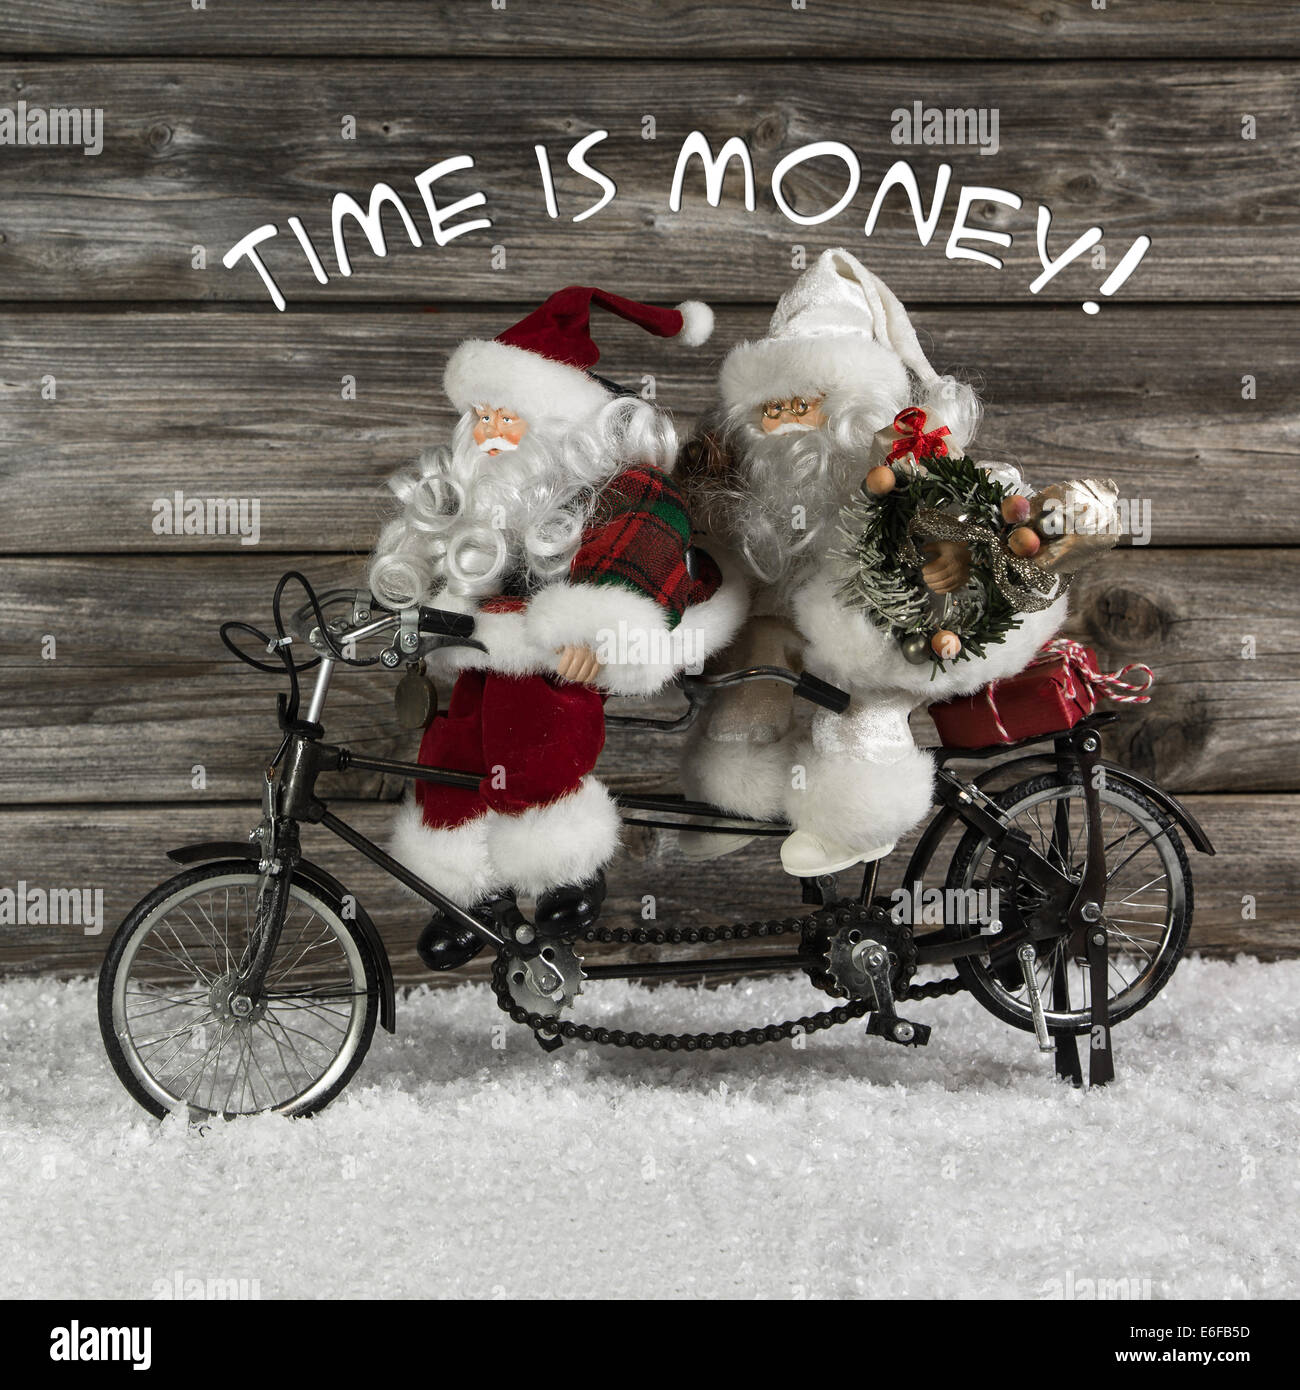 Time is money -  santa claus team in rush for buying christmas presents. Funny photo in vintage style with an old tandem bike of Stock Photo